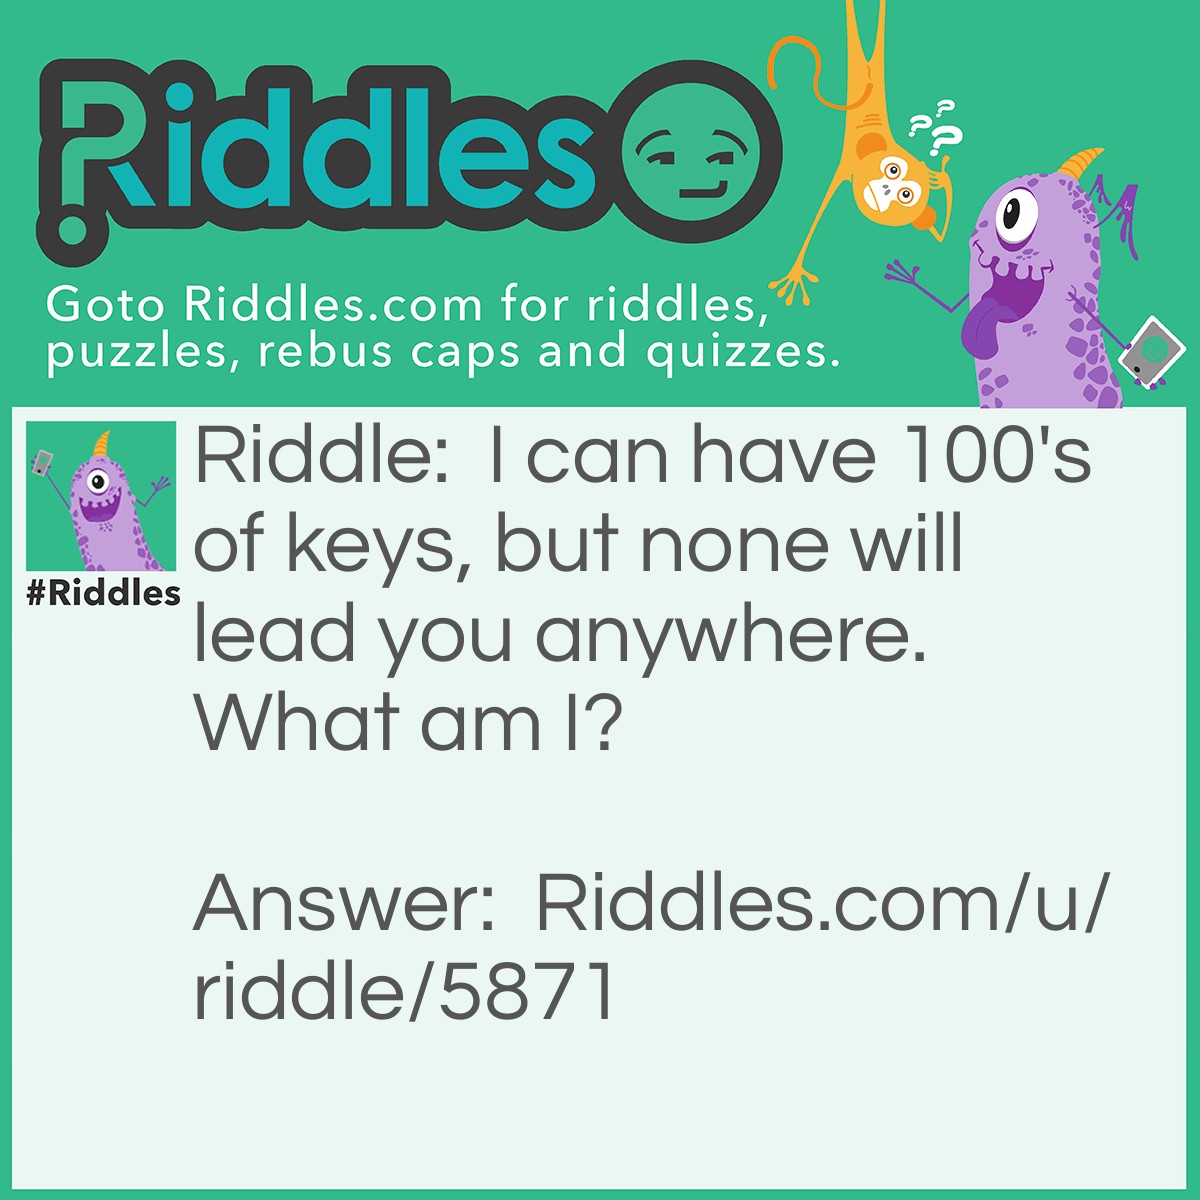 Riddle: I can have 100's of keys, but none will lead you anywhere. What am I? Answer: A Piano.